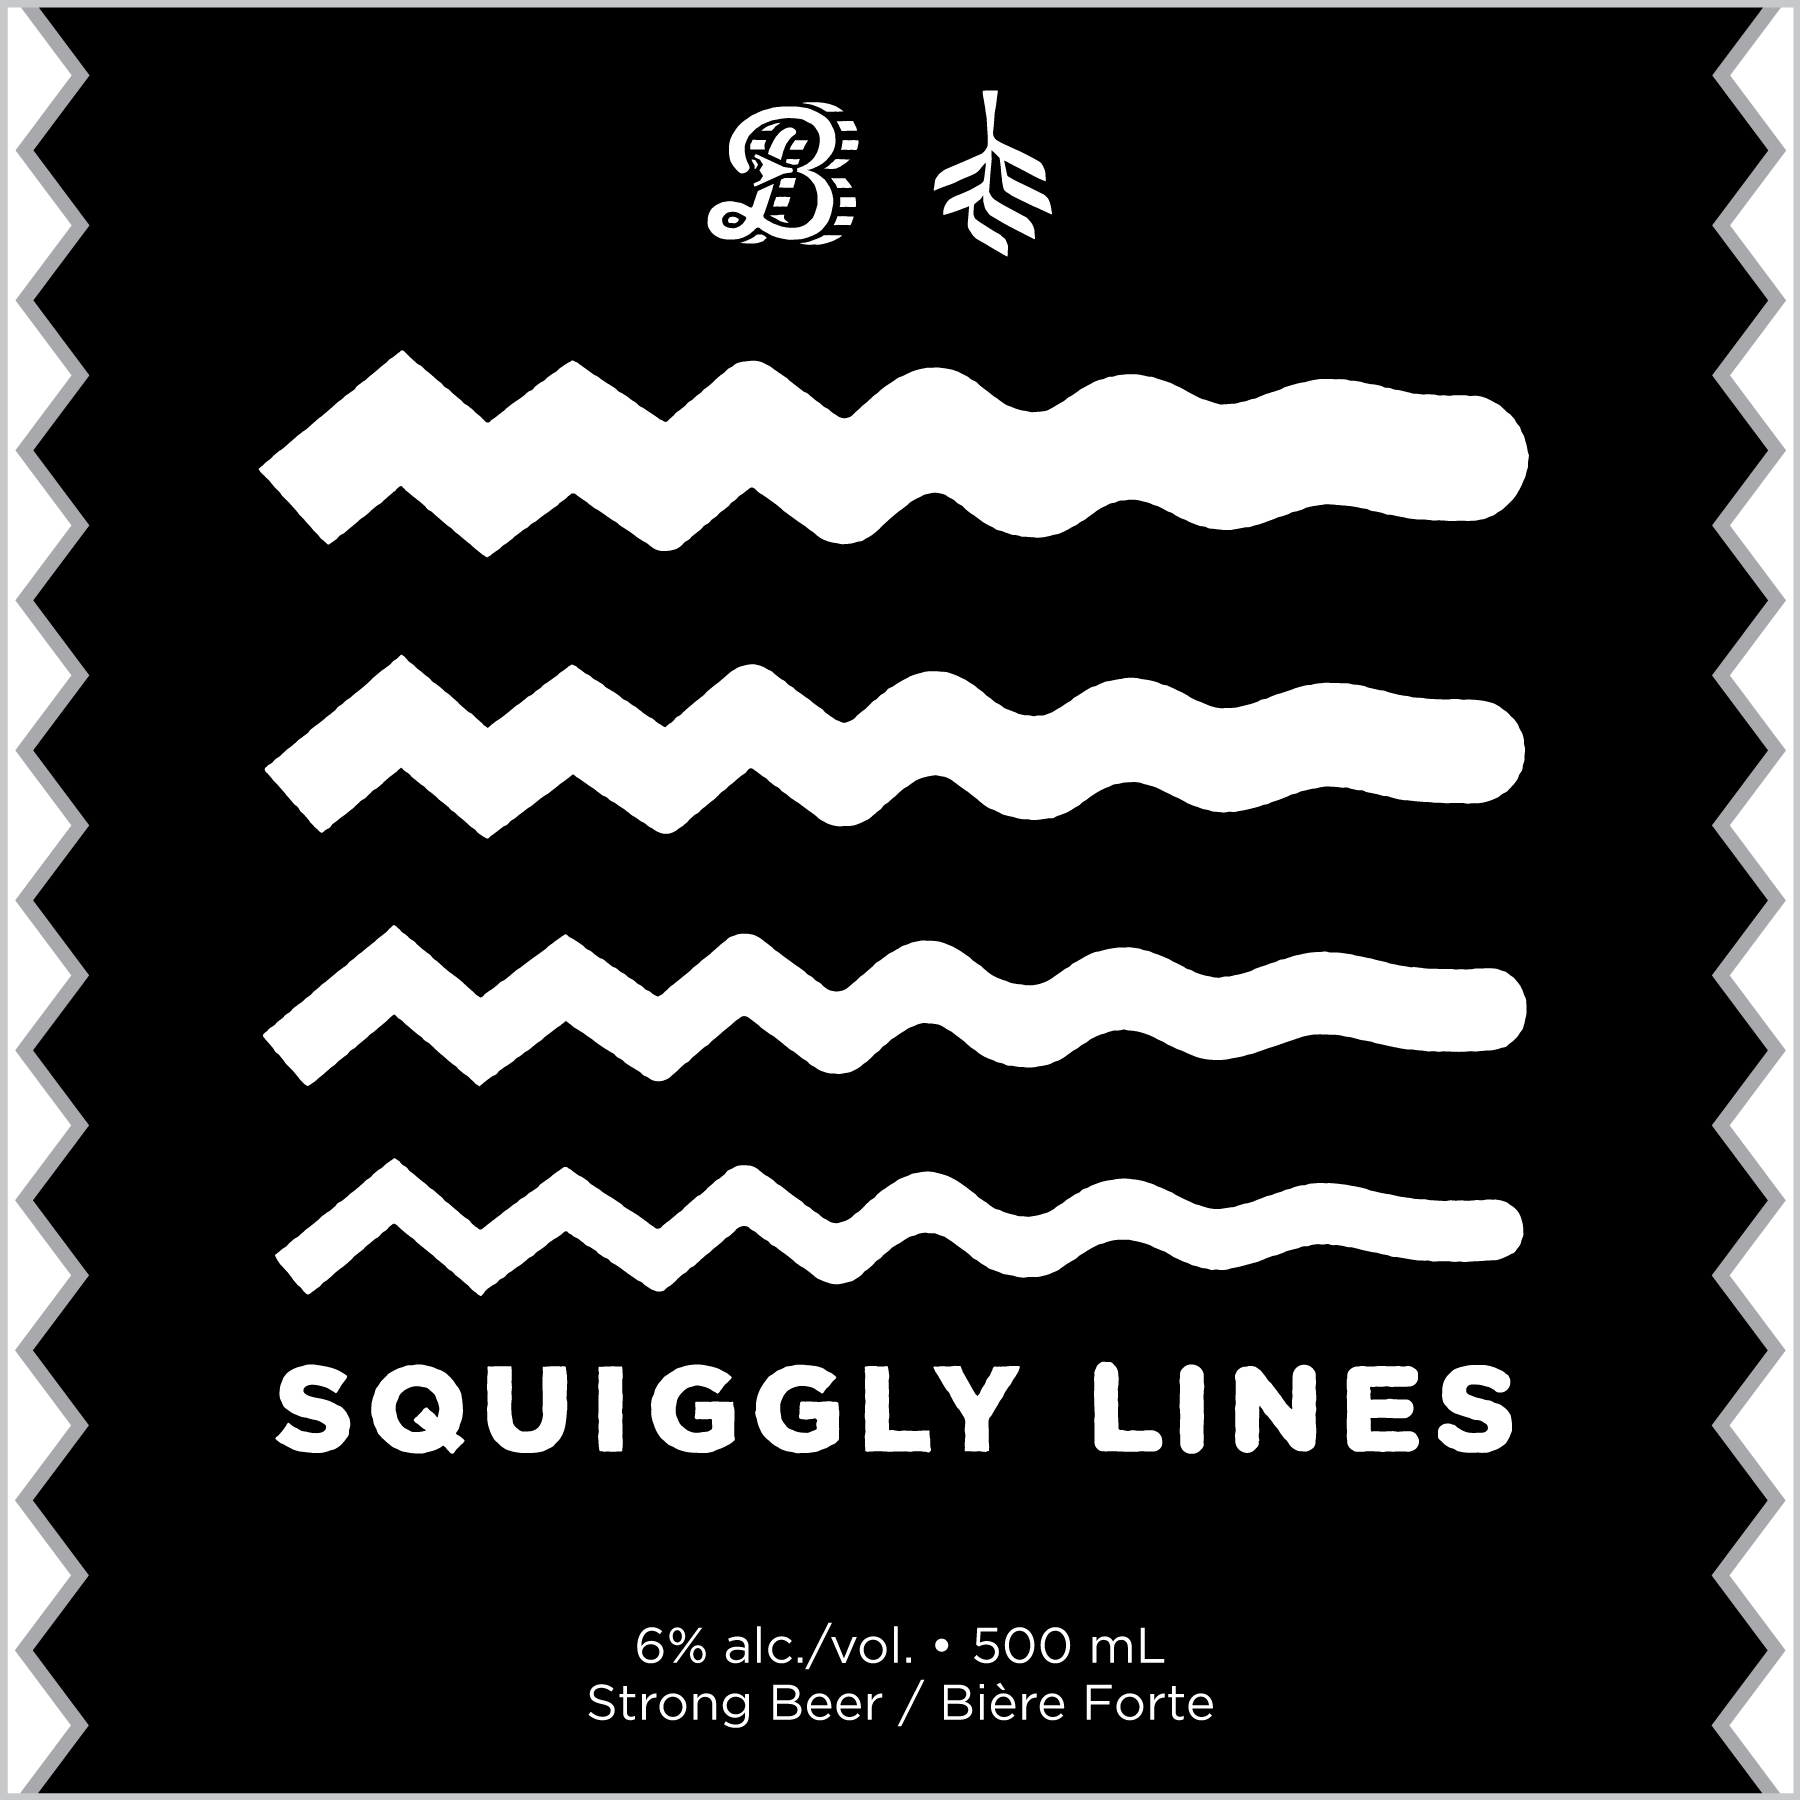 Squiggly Lines